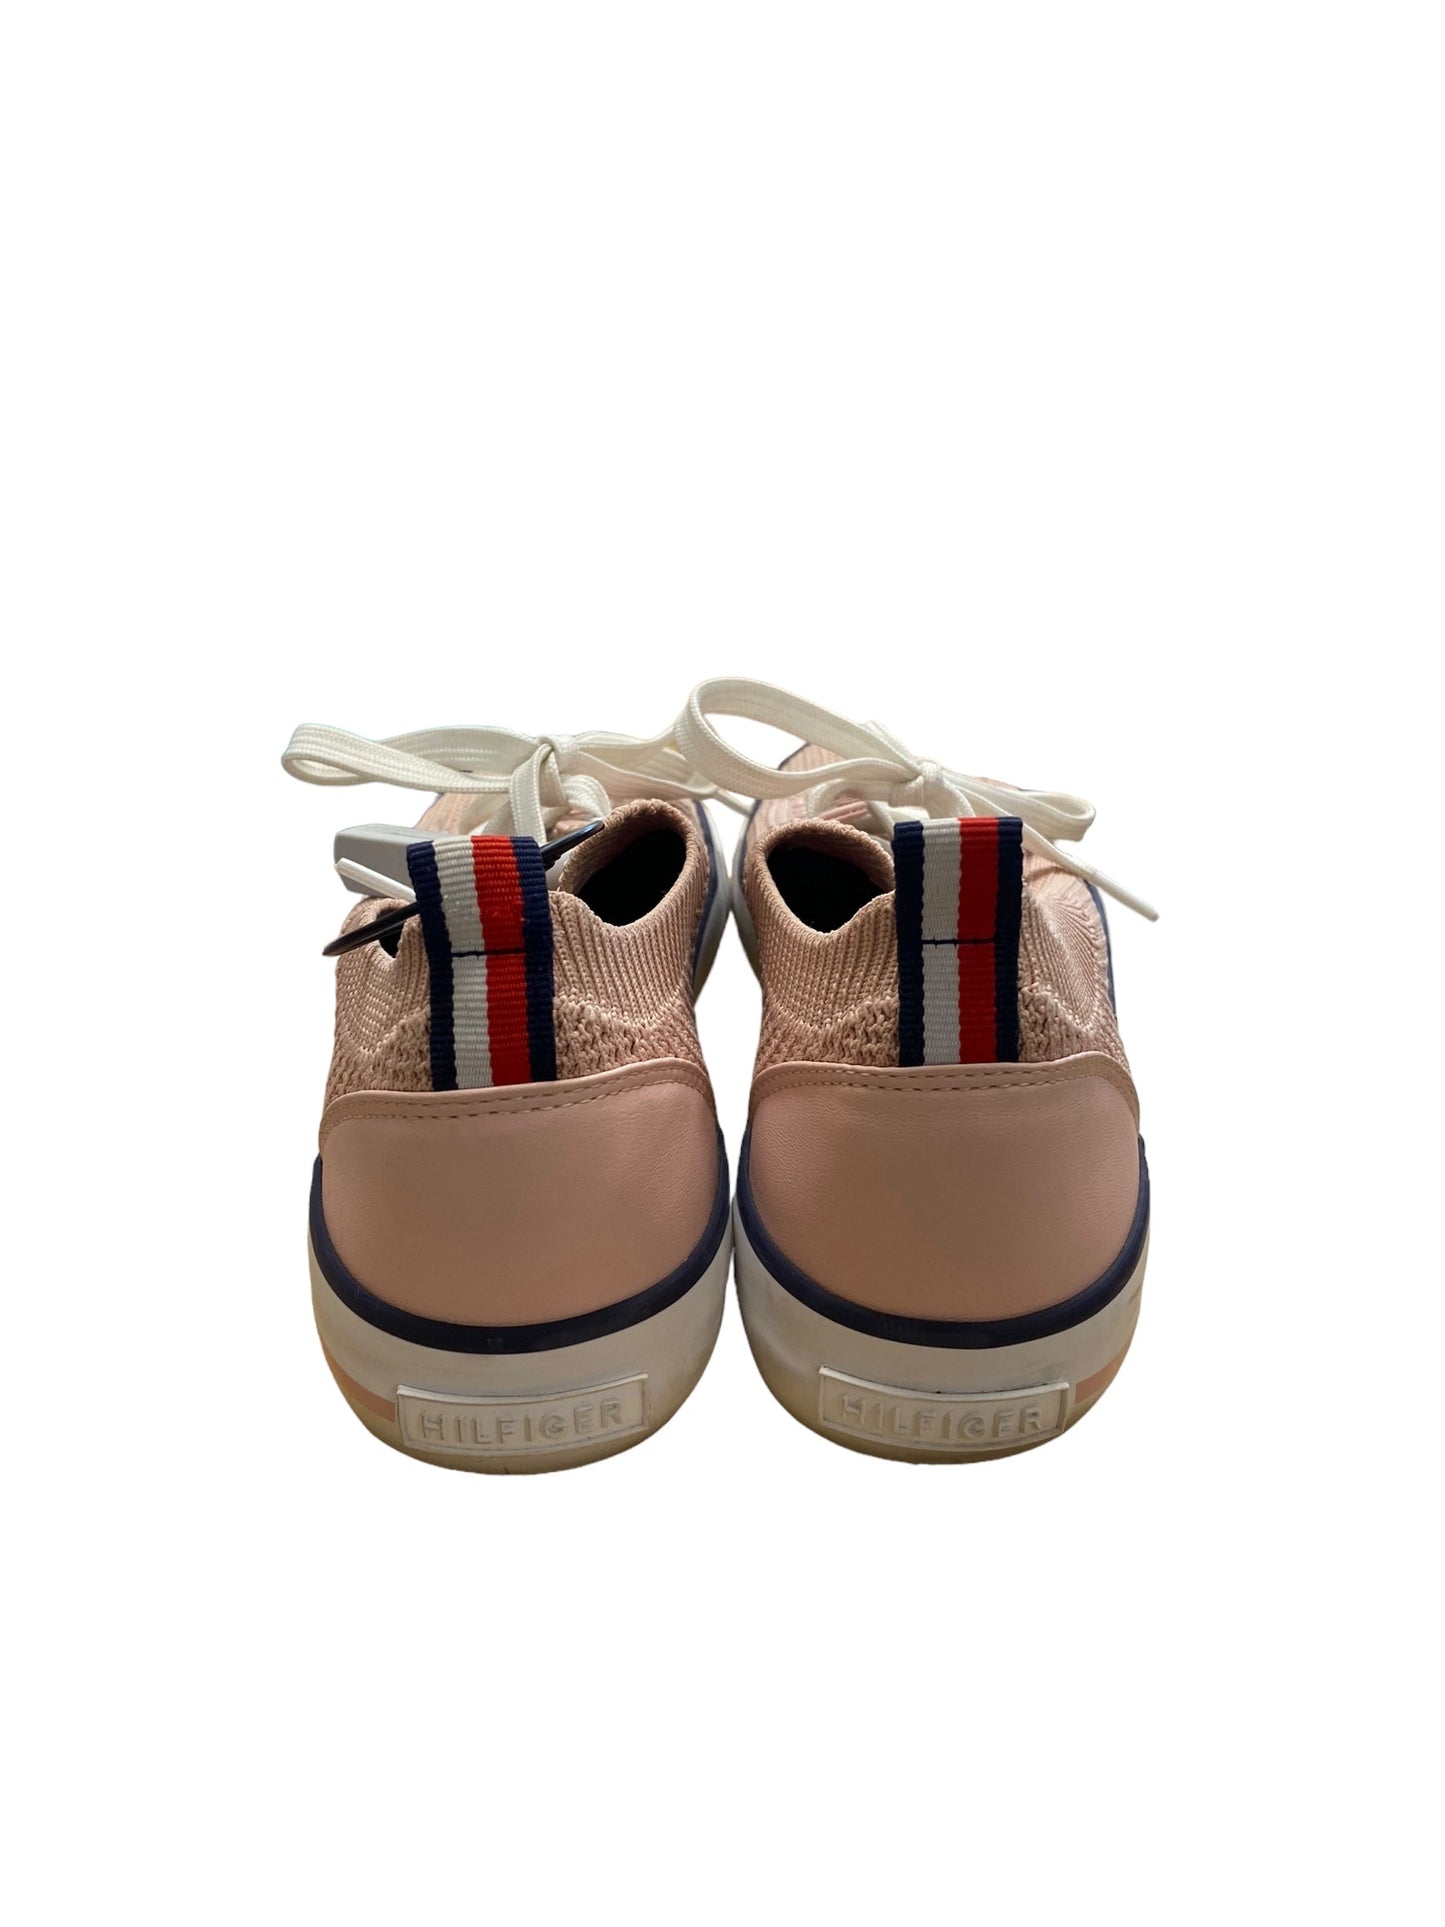 Pink Shoes Flats Tommy Hilfiger, Size 7